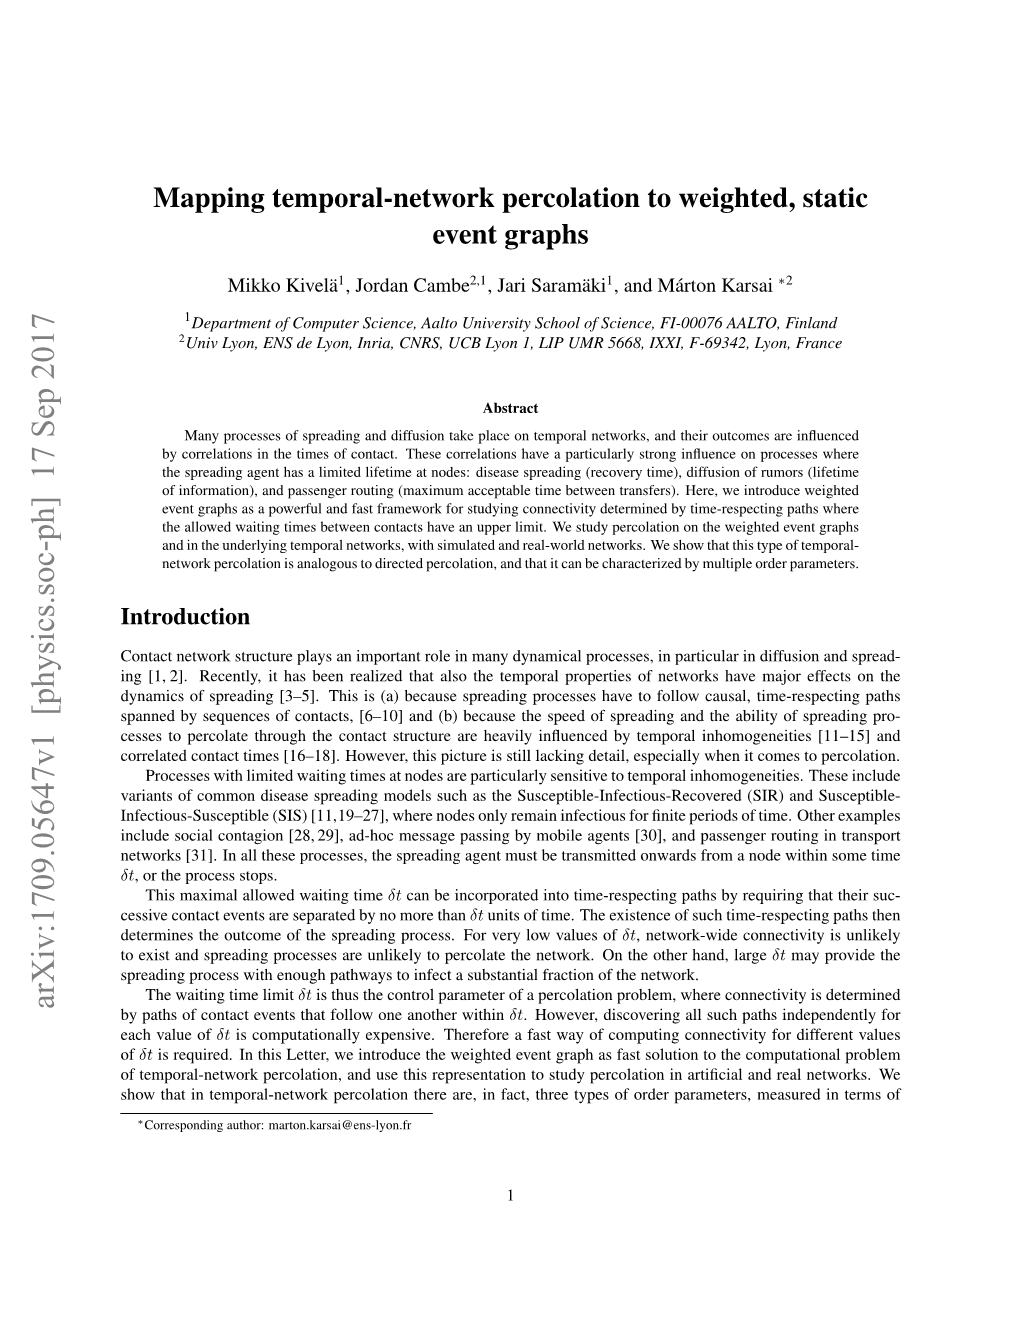 Mapping Temporal-Network Percolation to Weighted, Static Event Graphs